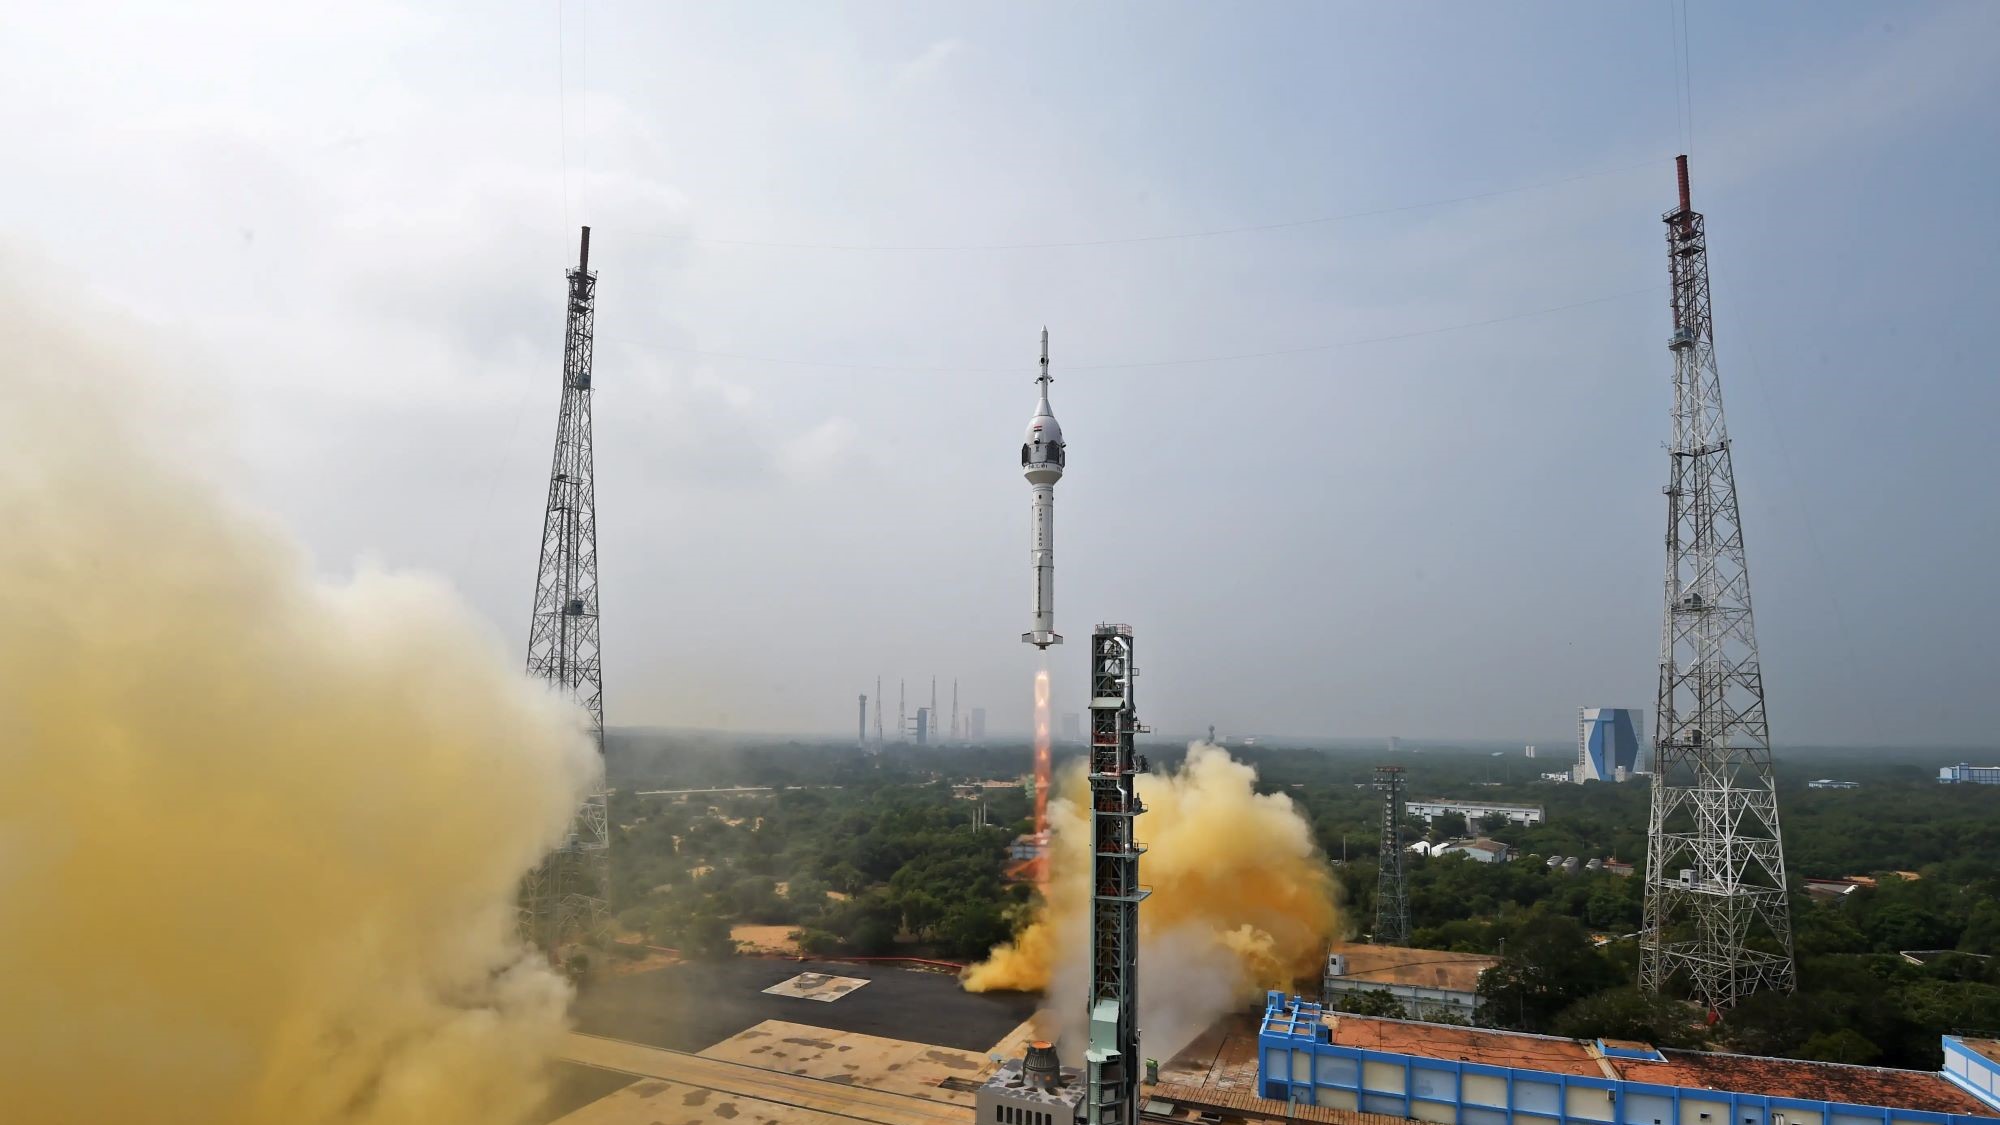 India had an impressive year in space—and it’s just getting started